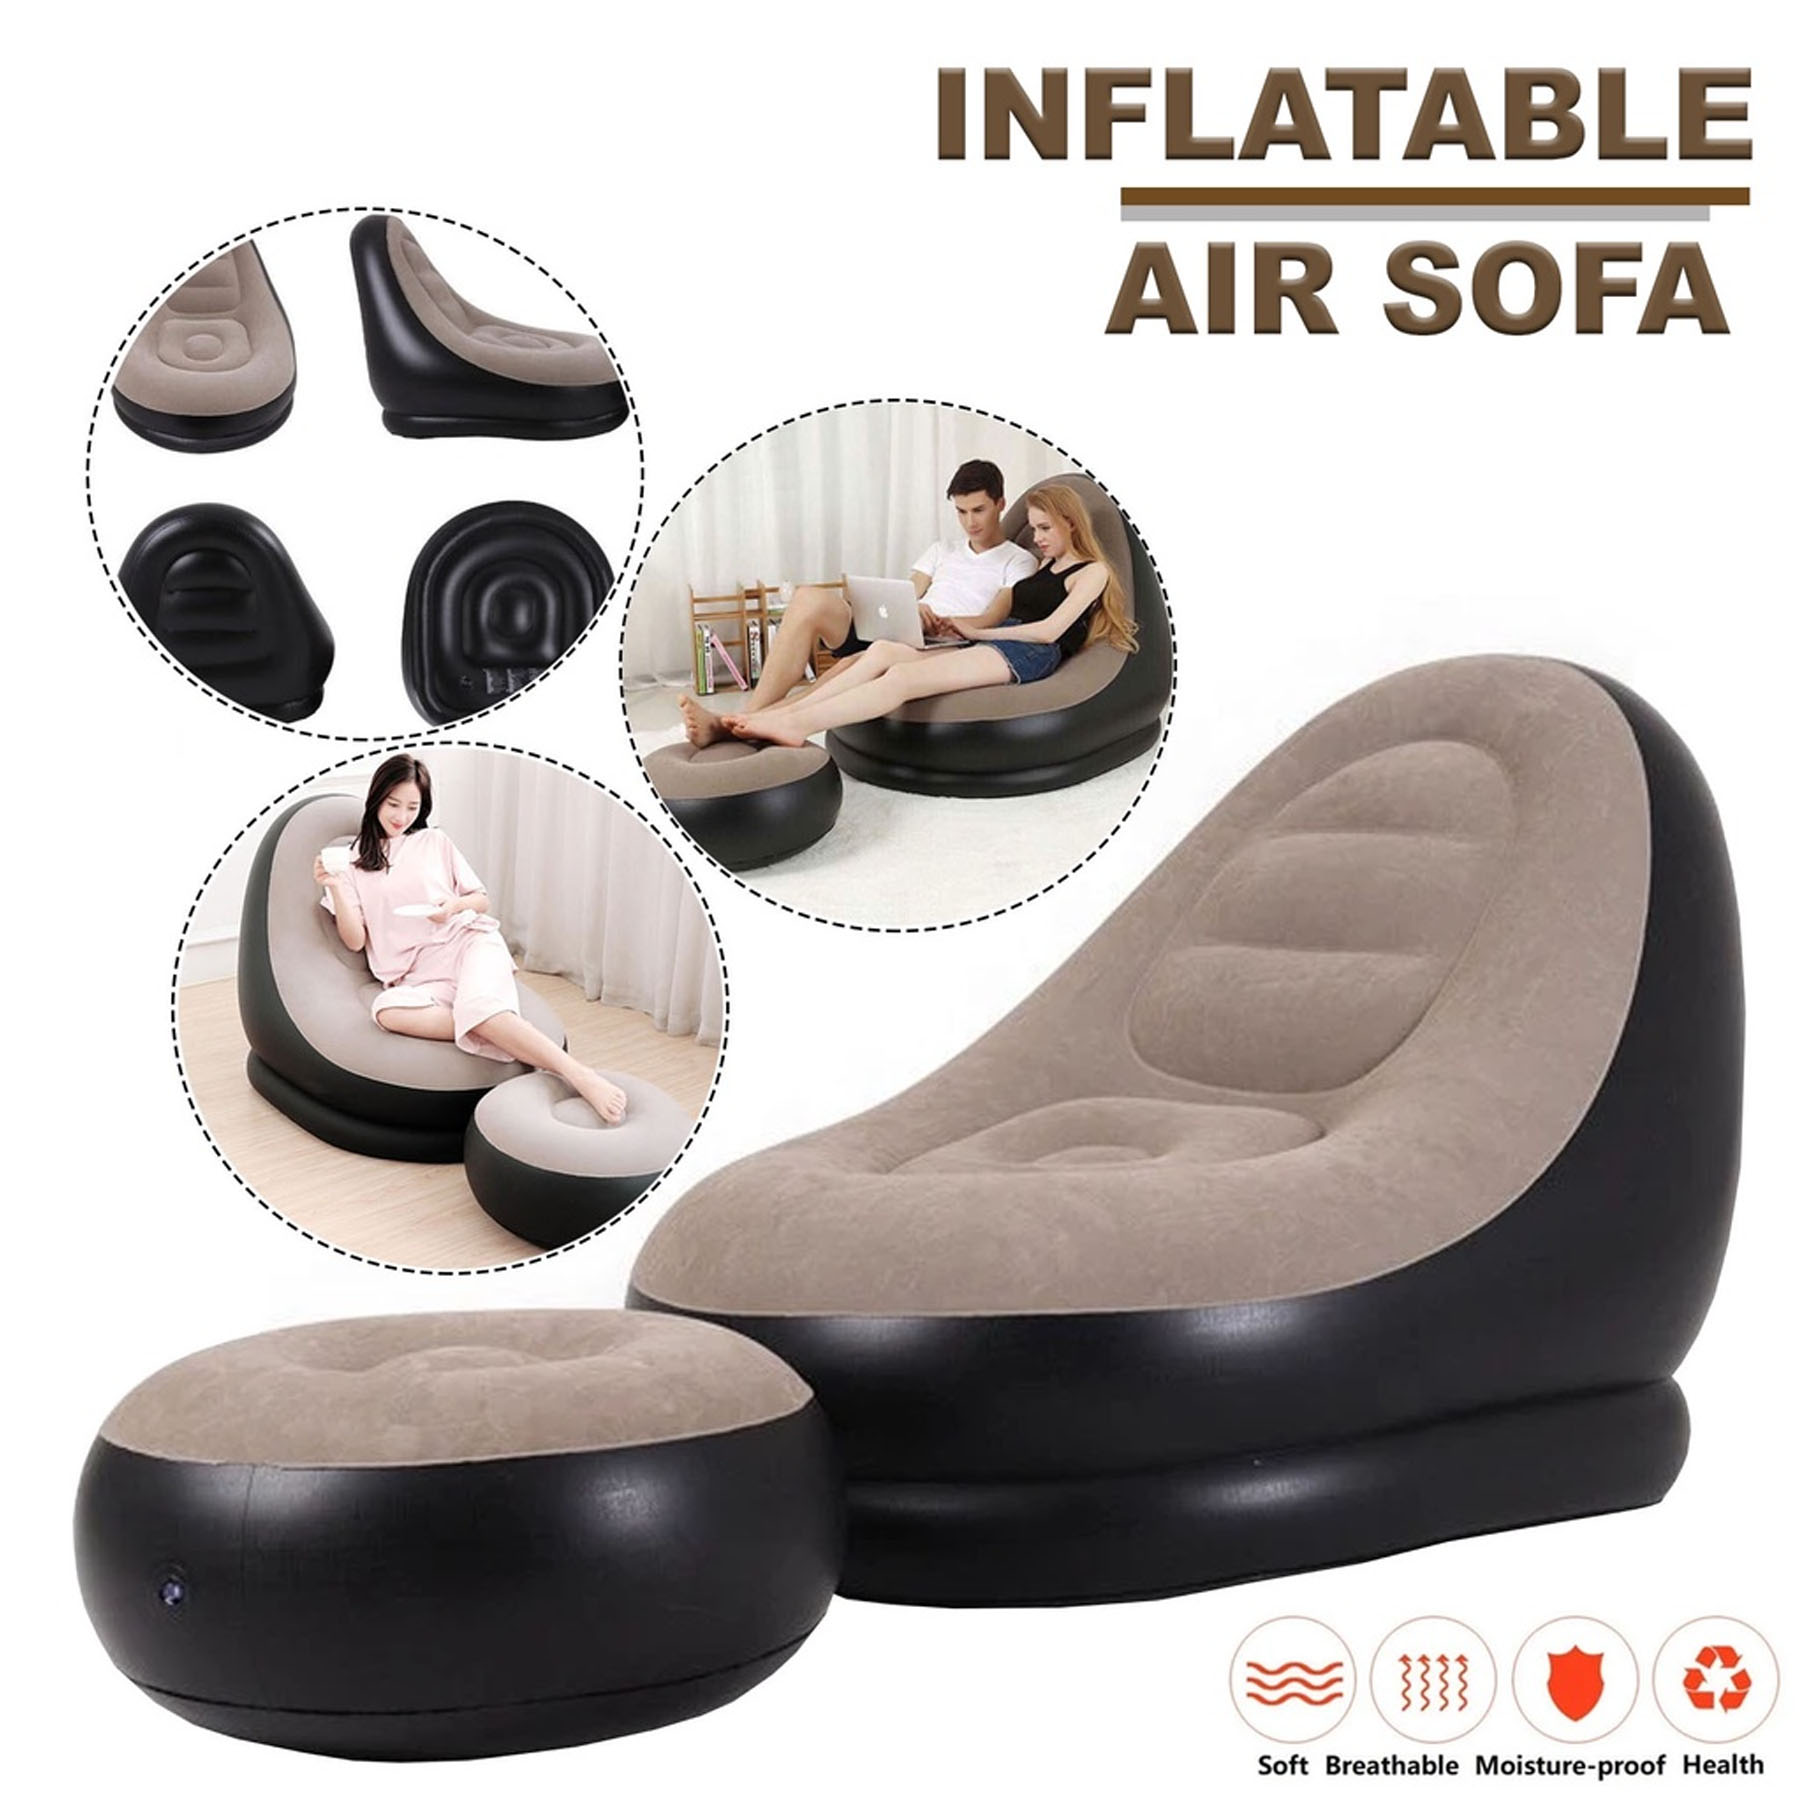 Inflatable Air Sofa With Foot Rest